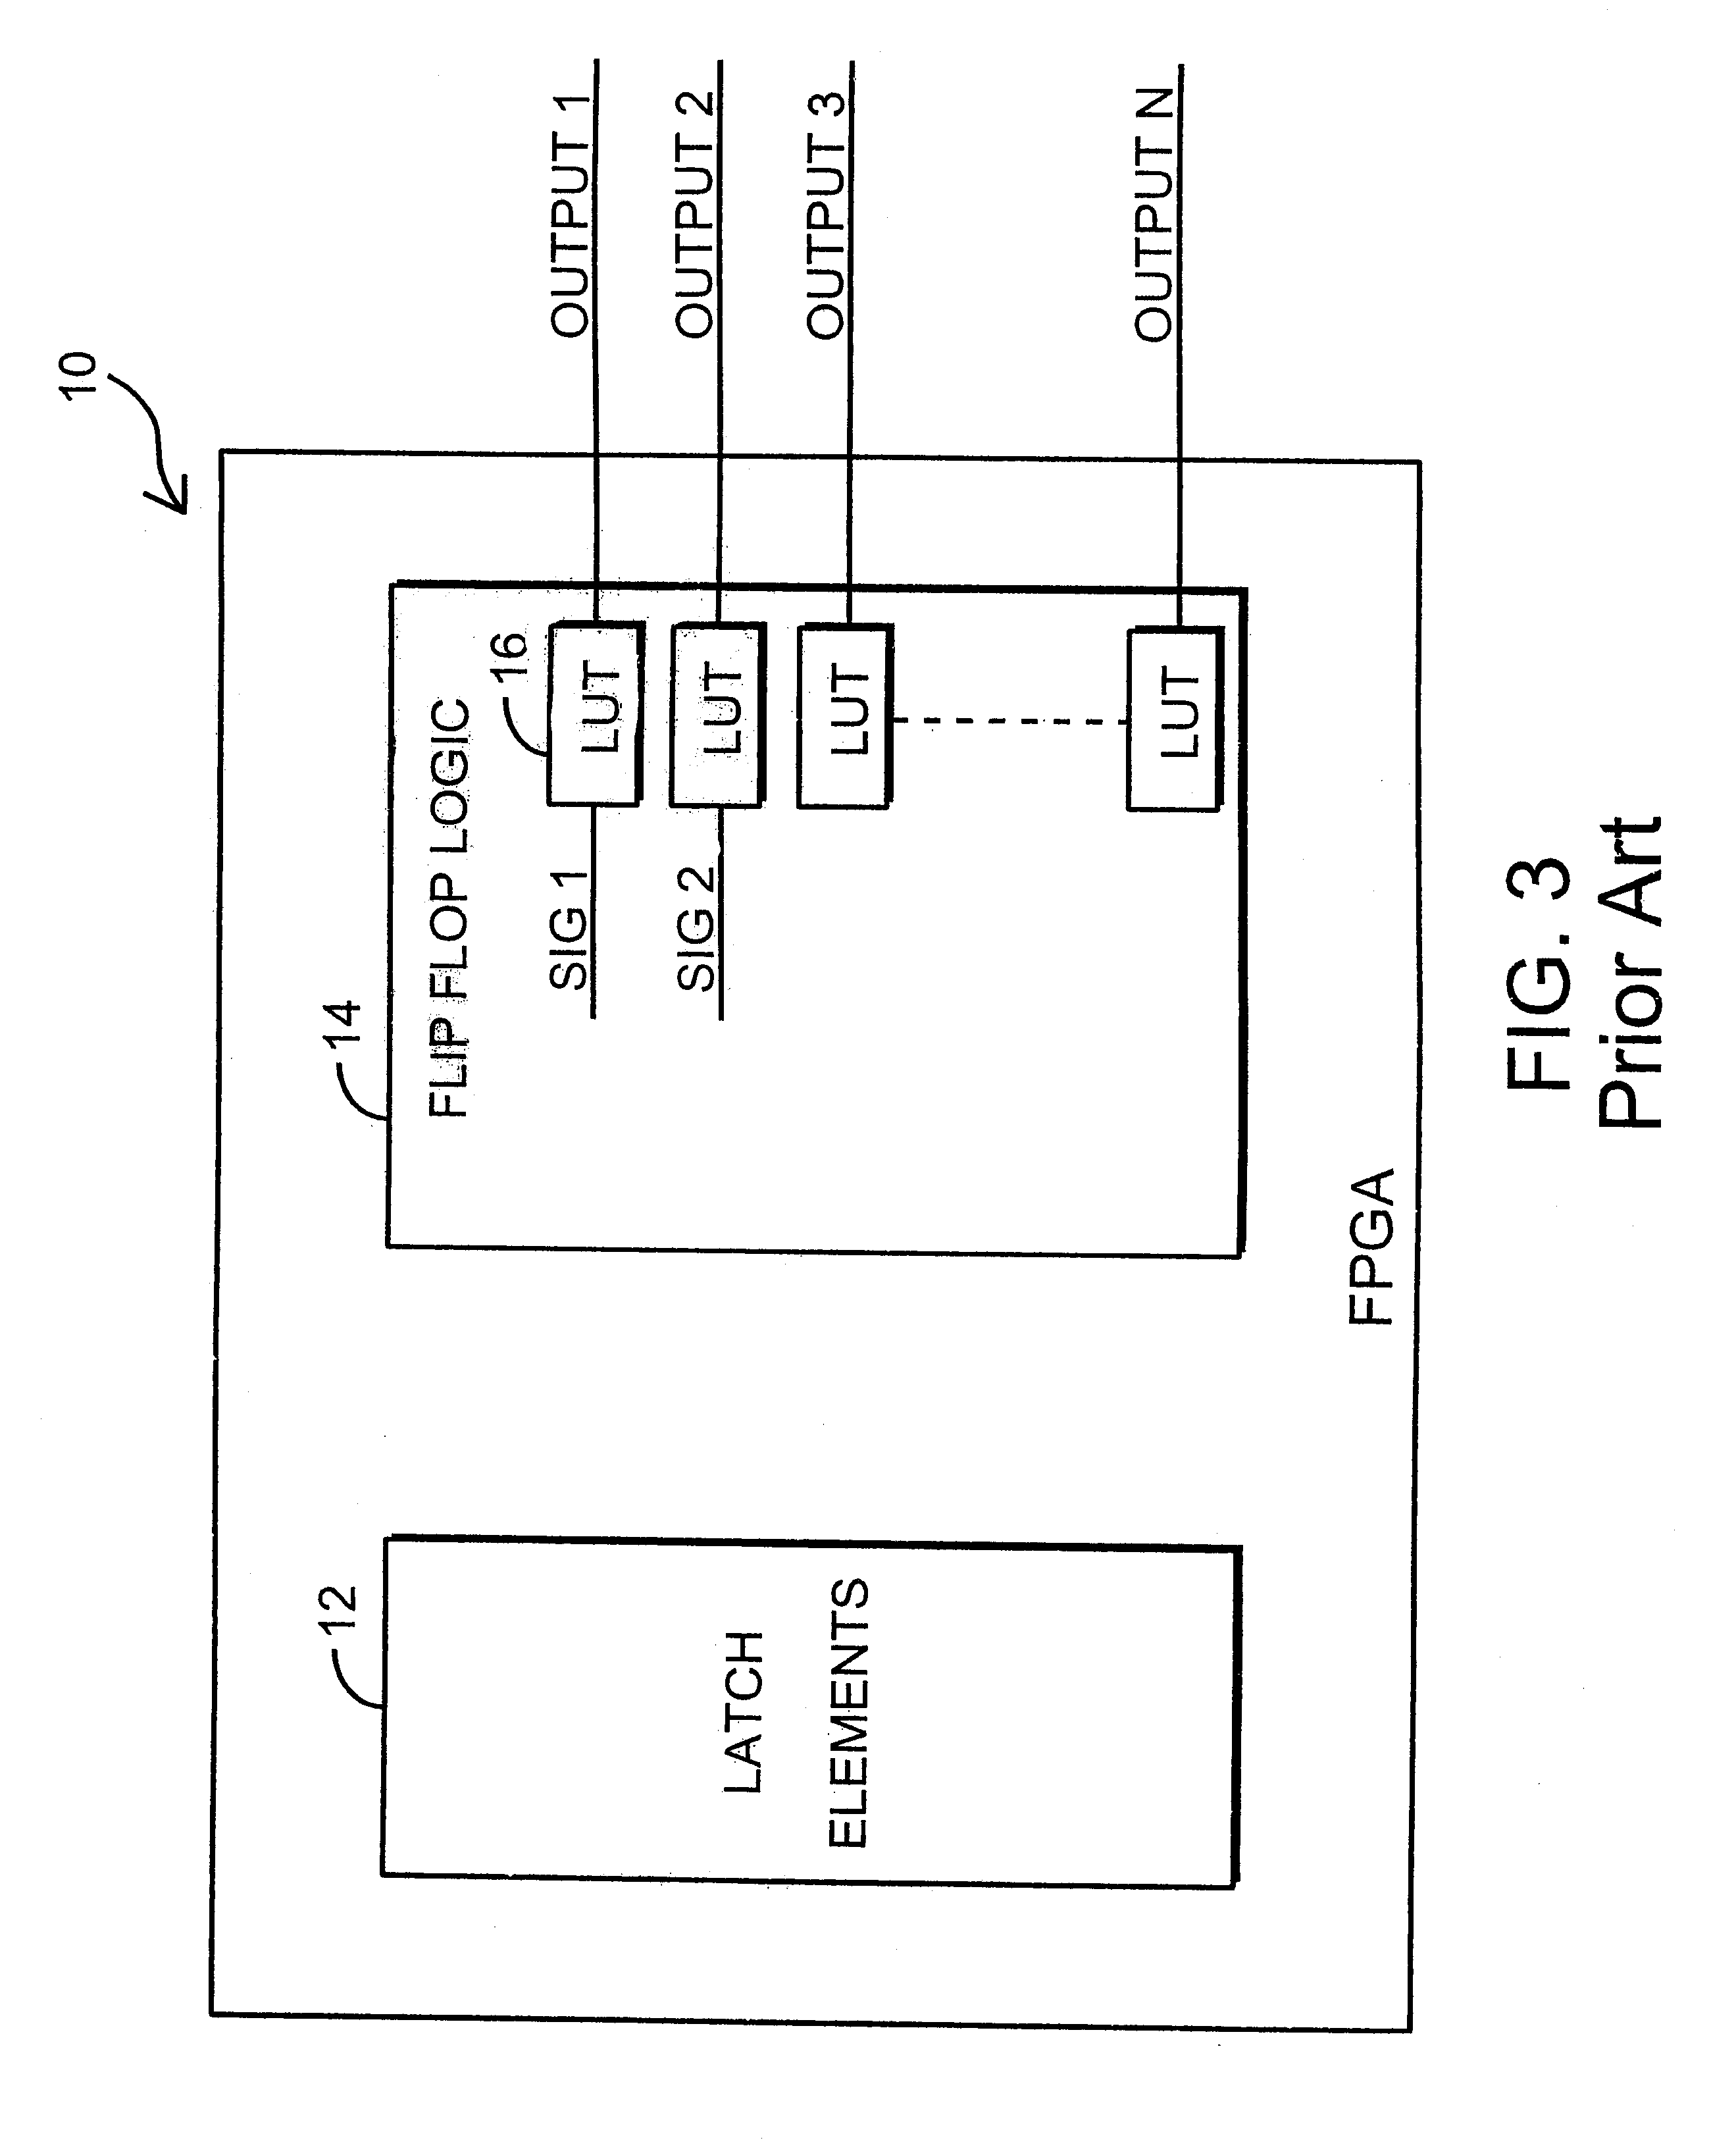 Asynchronous latch design for field programmable gate arrays